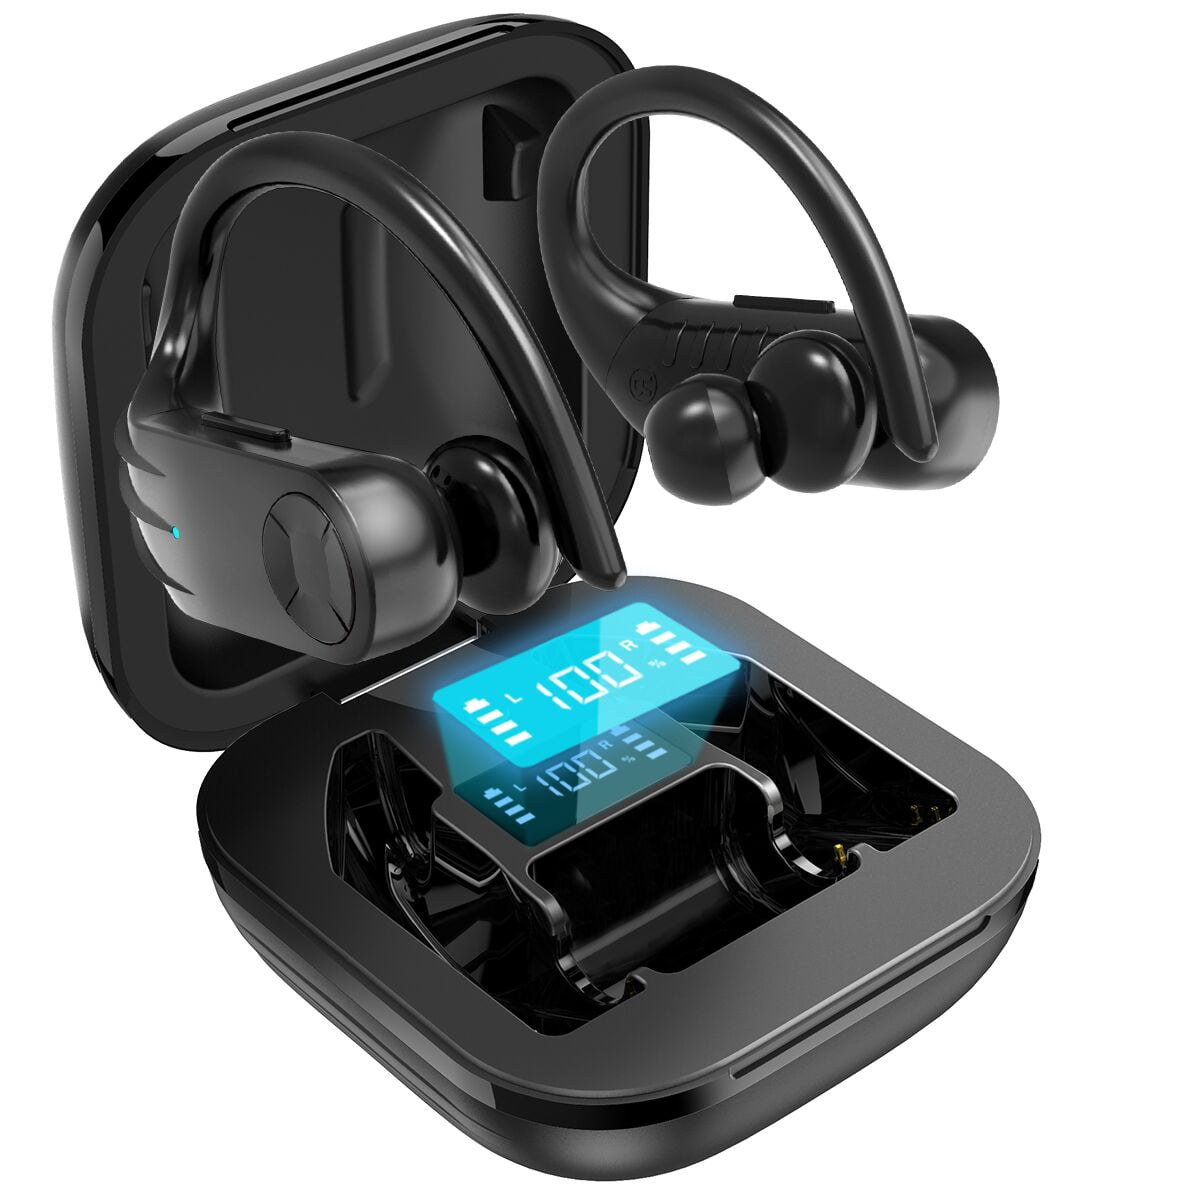 Wireless Earbuds,Bluetooth Headphones Stereo Earphone Cordless Sport Headsets,Bluetooth In-Ear Earphones with Built-In Mic for Smart Phones 